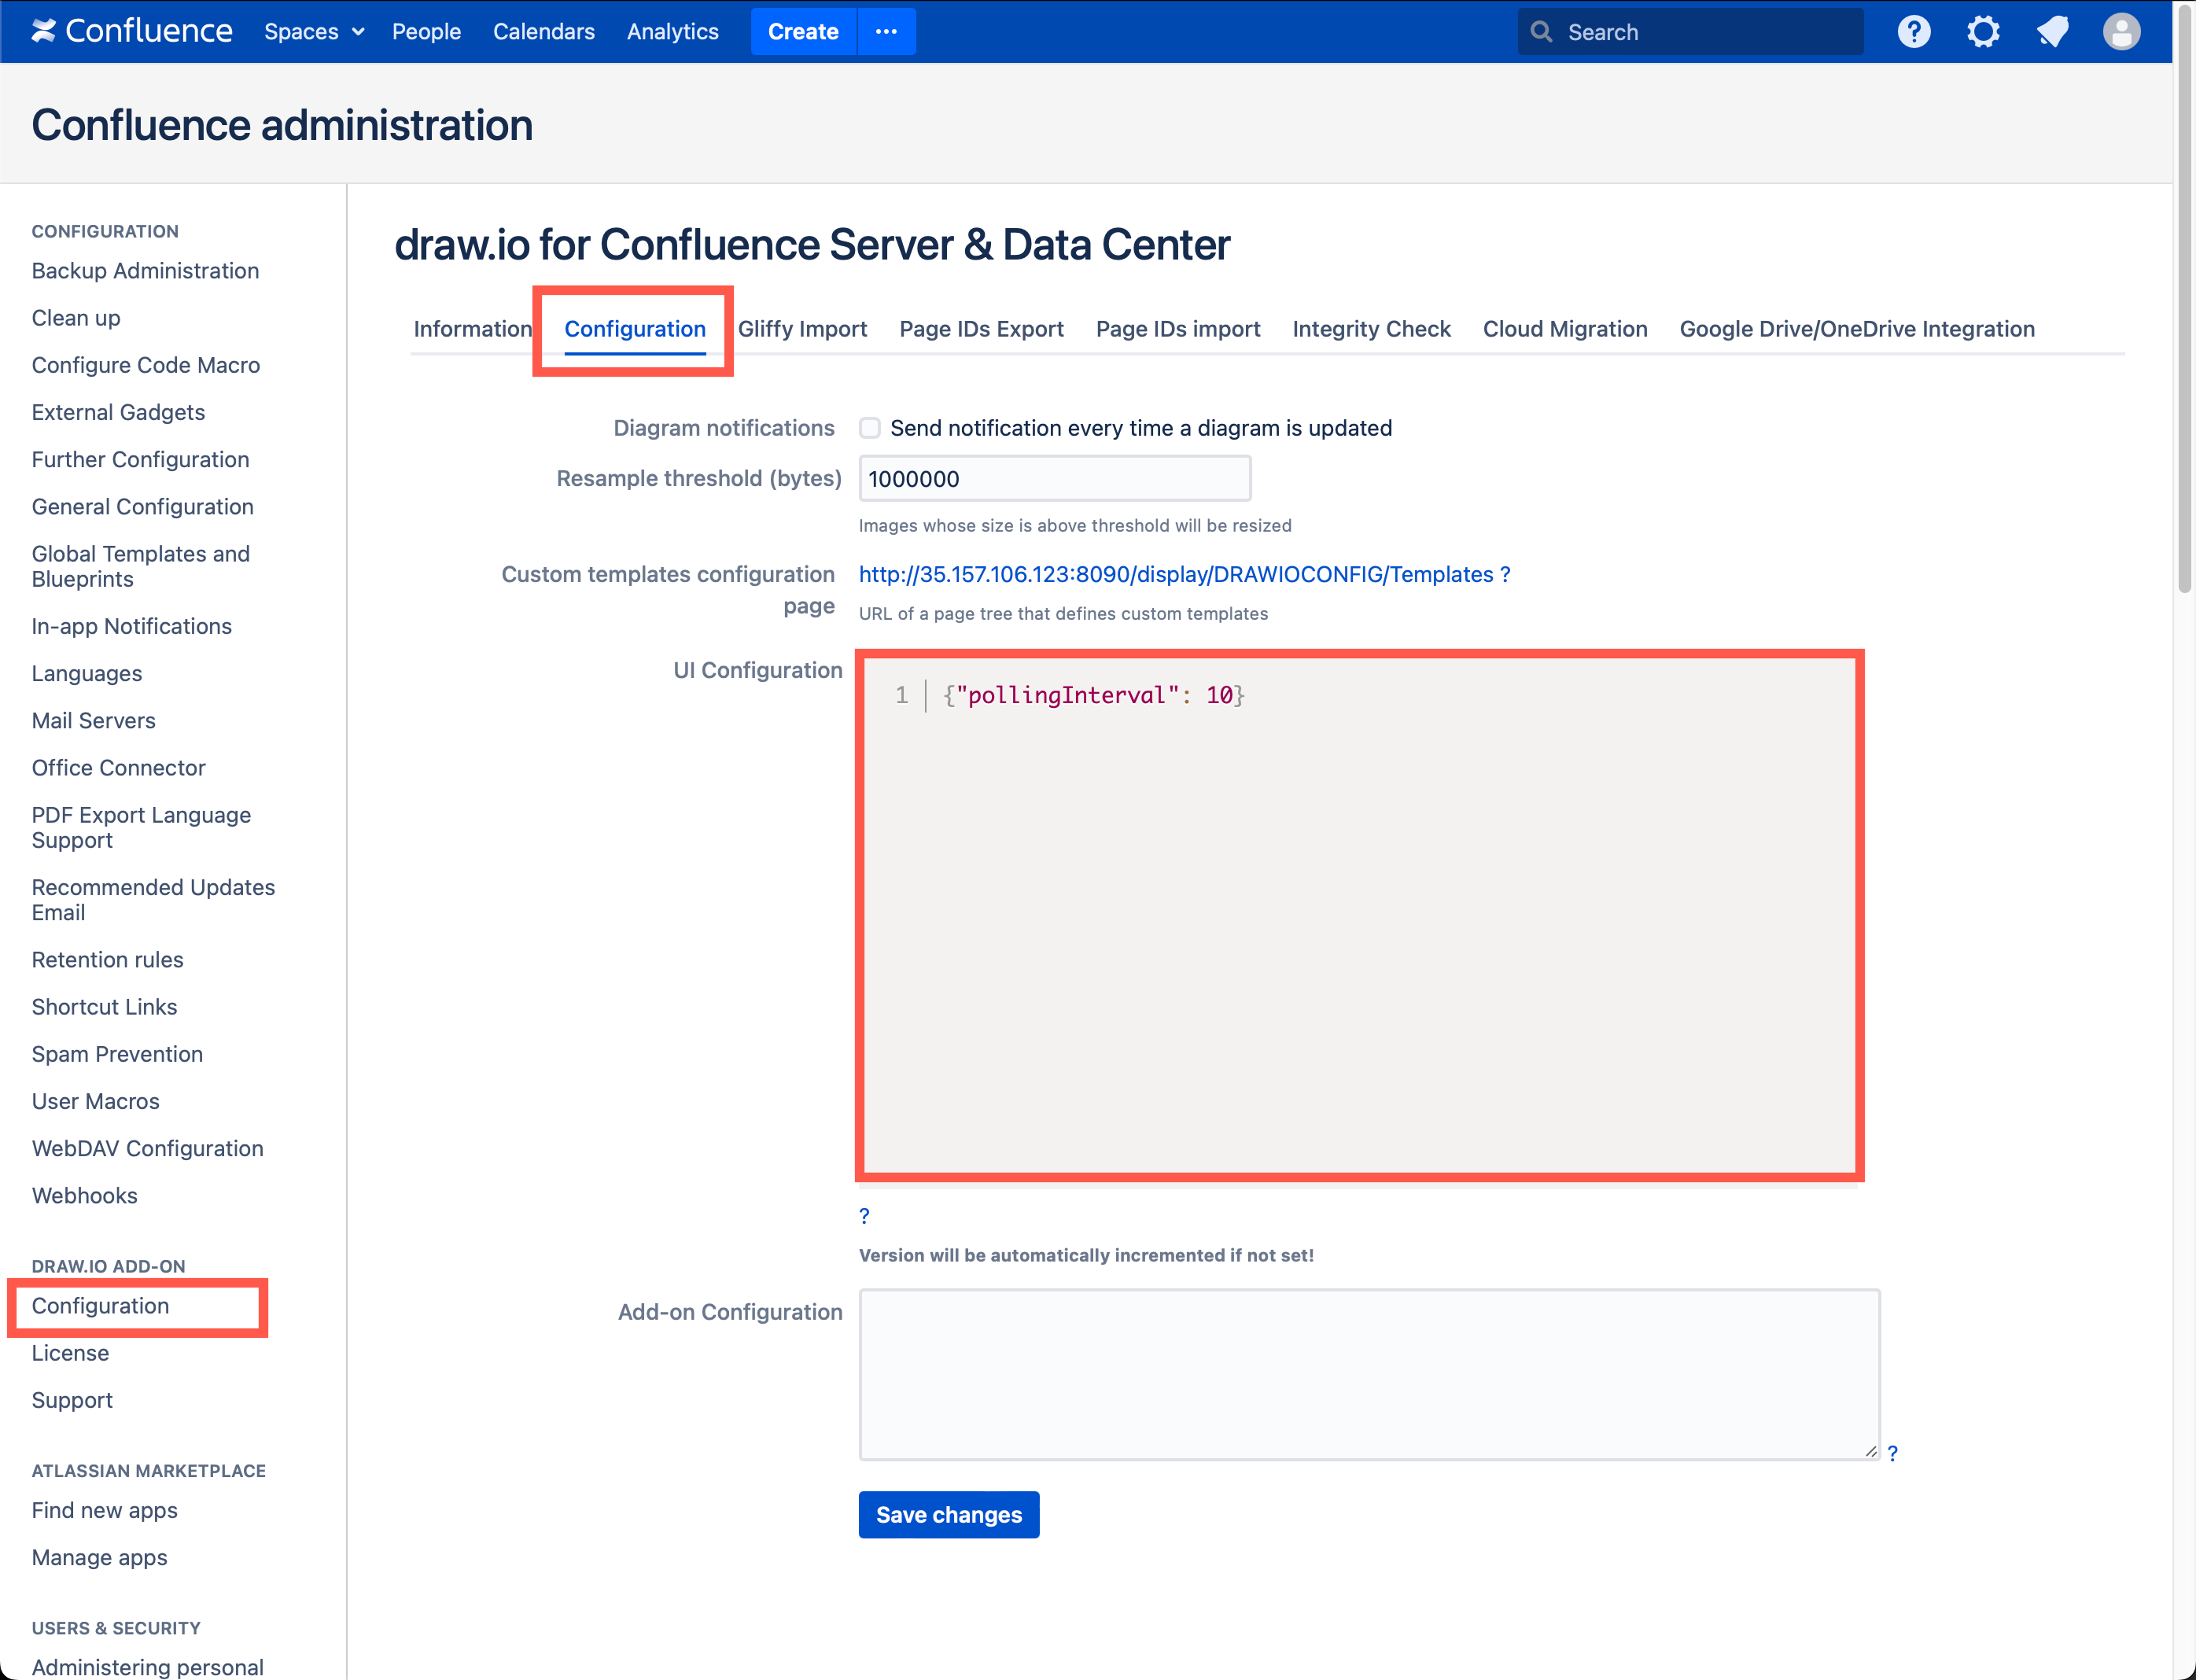 Set a faster polling interval for collaborative editing in Confluence DC 8.x via the app configuration in your Confluence administration